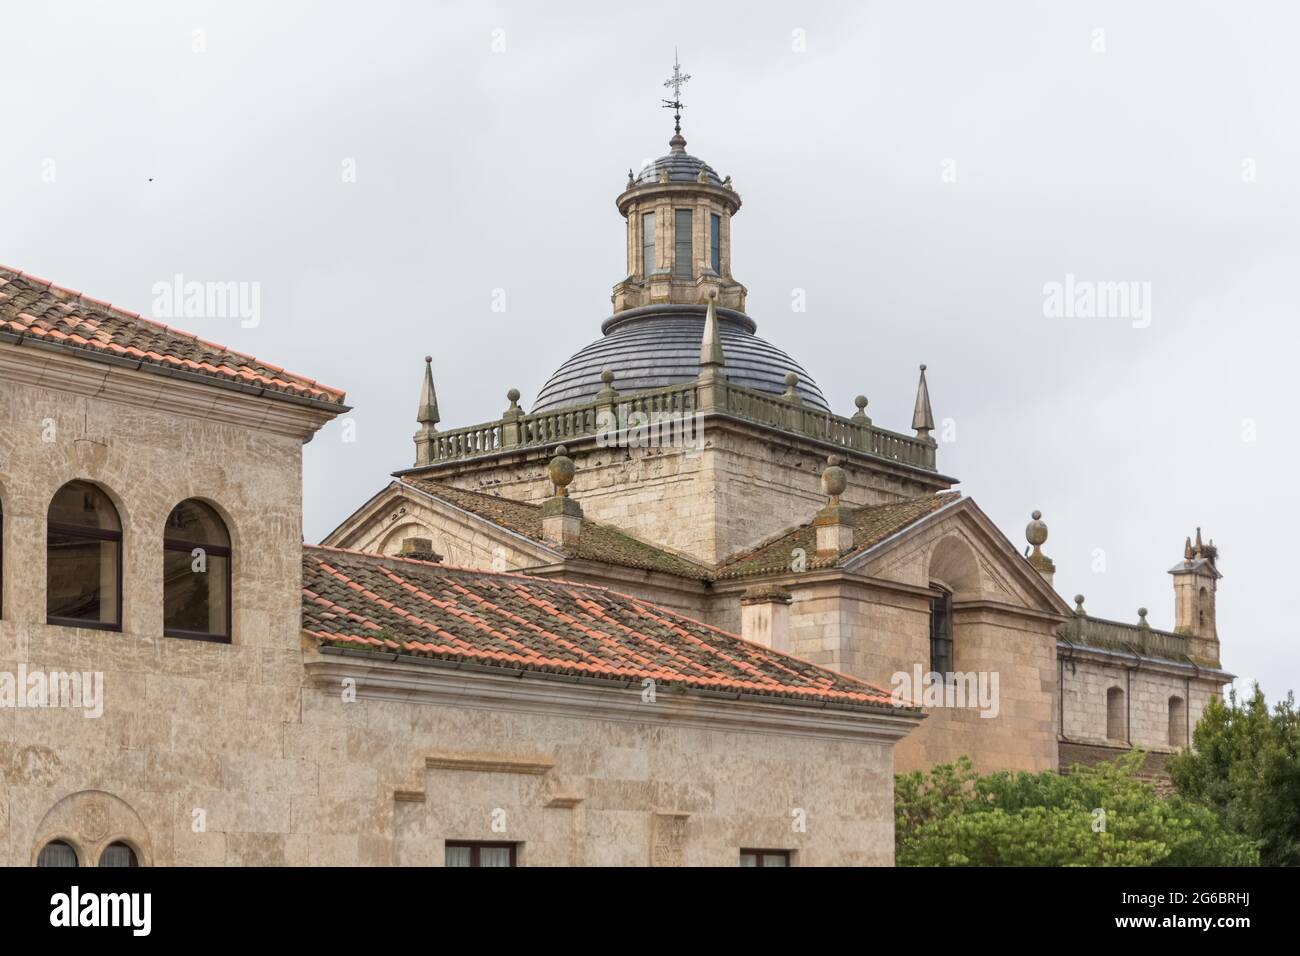 Cuidad Rodrigo / Spain - 05 13 2021: Back view at the dome copula tower at the iconic spanish Romanesque and Renaissance architecture building at the Stock Photo